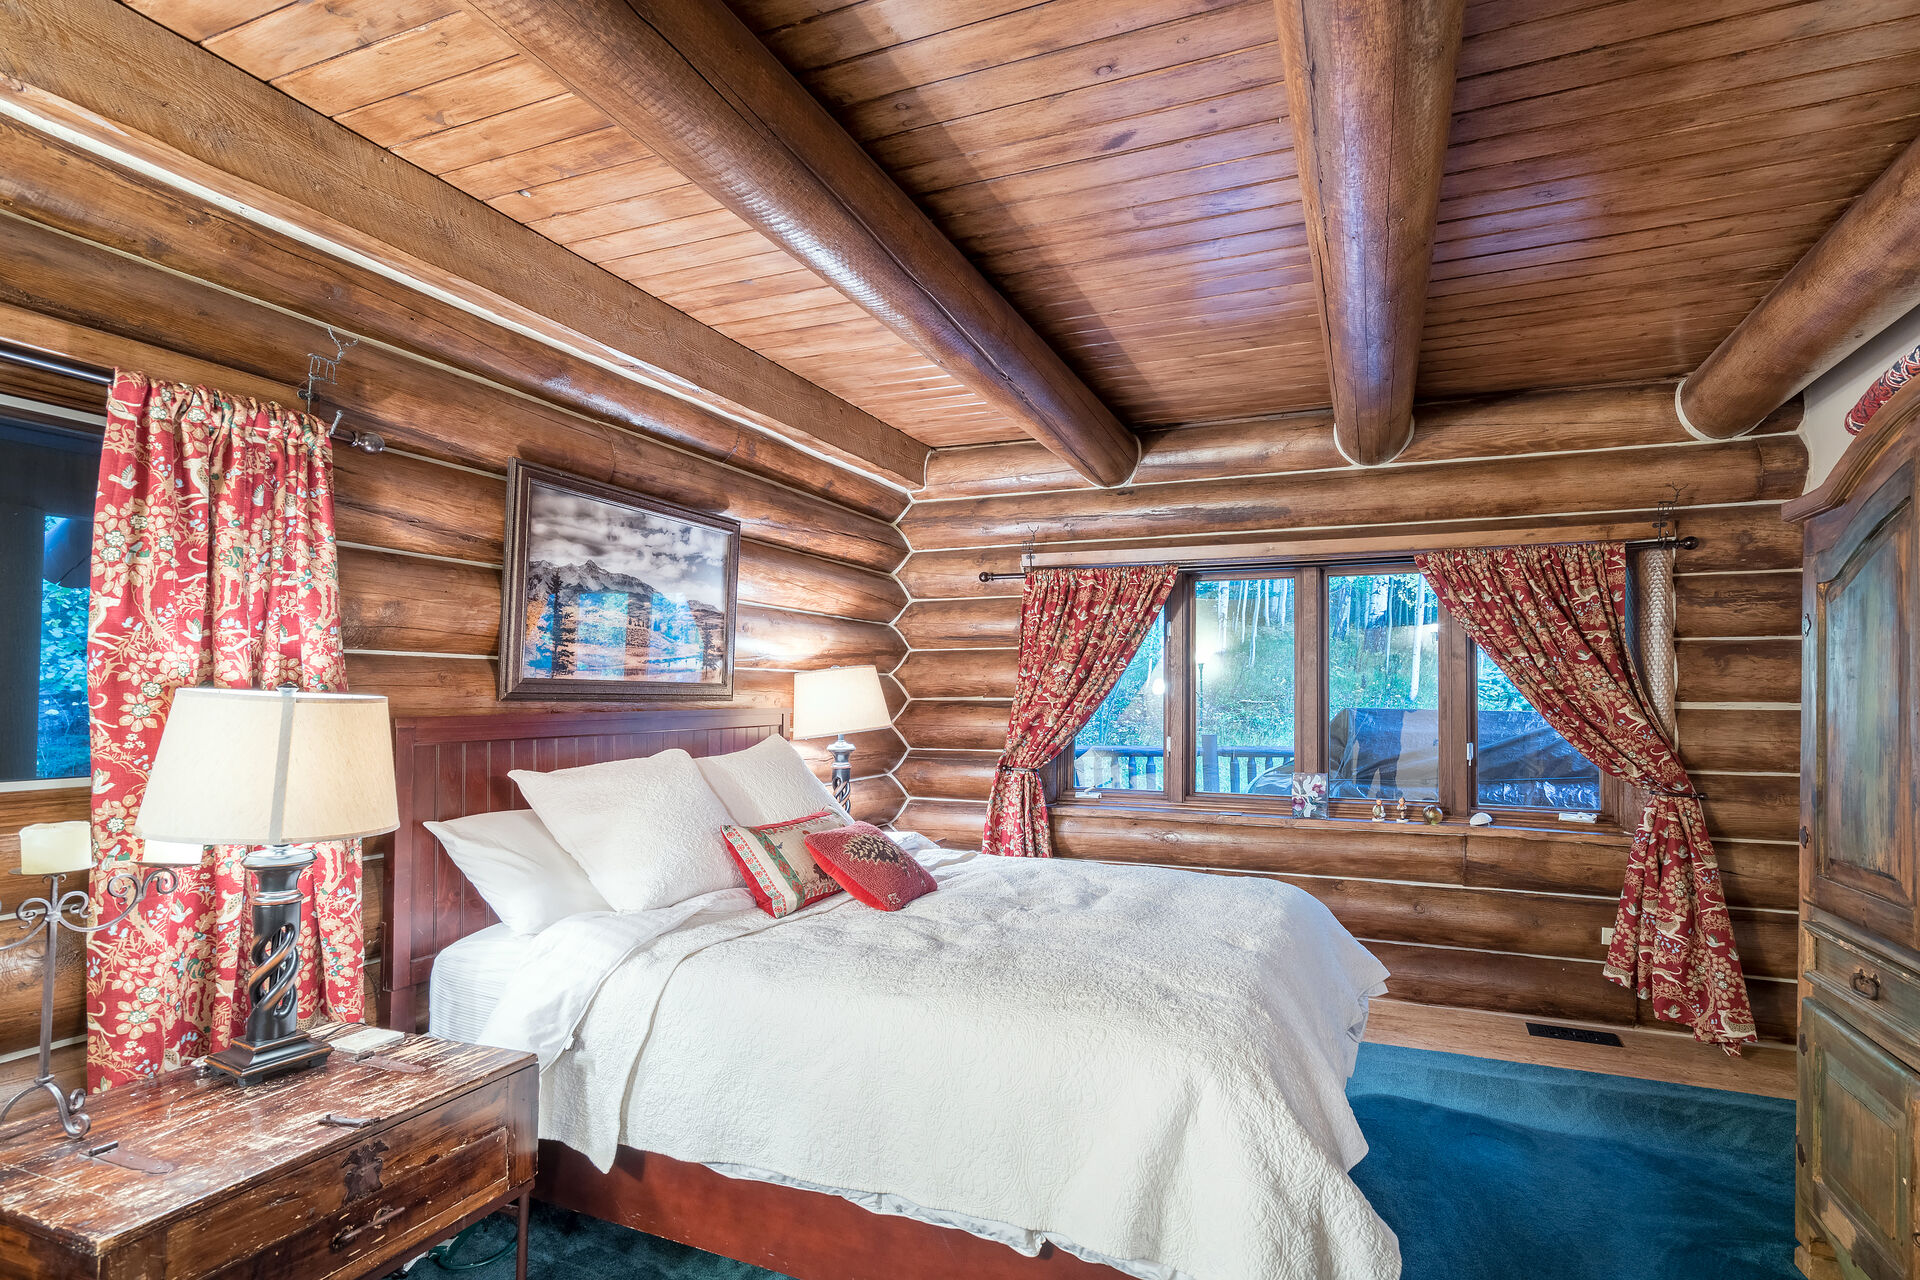 Bedroom with Wooden Logs and Views of Outside